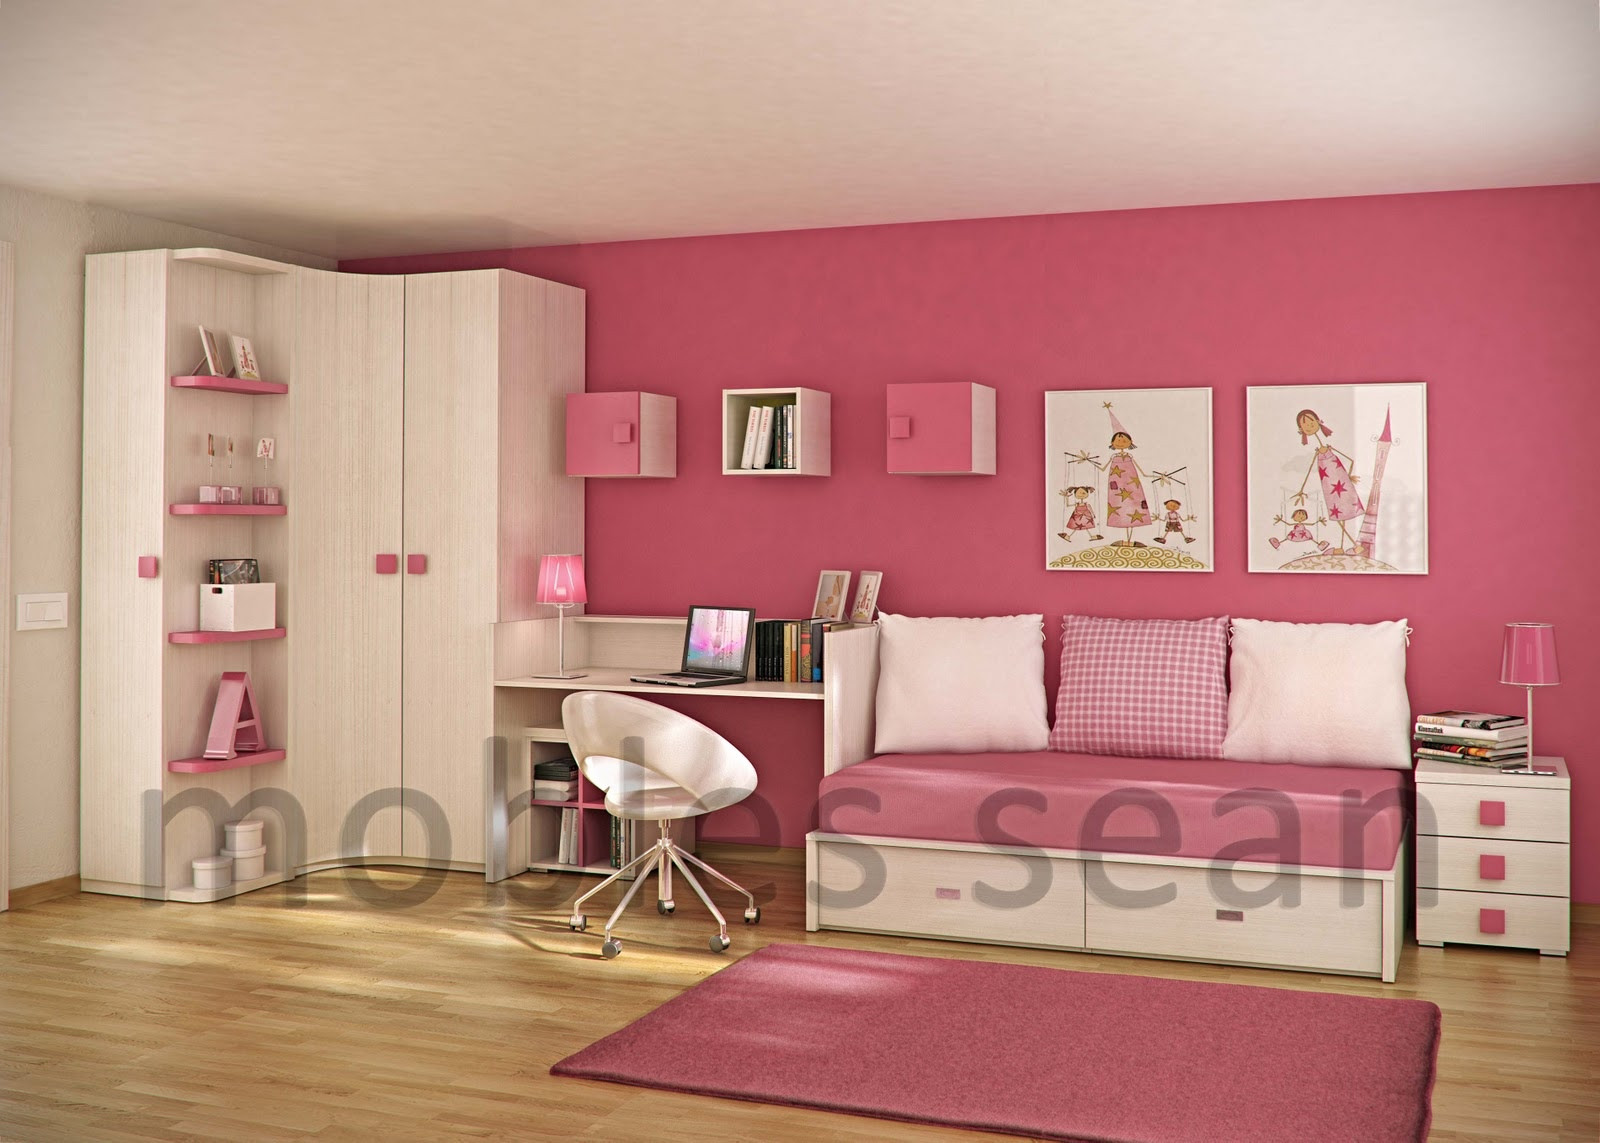 Room Designs For Kids
 Space Saving Designs for Small Kids Rooms Futura Home